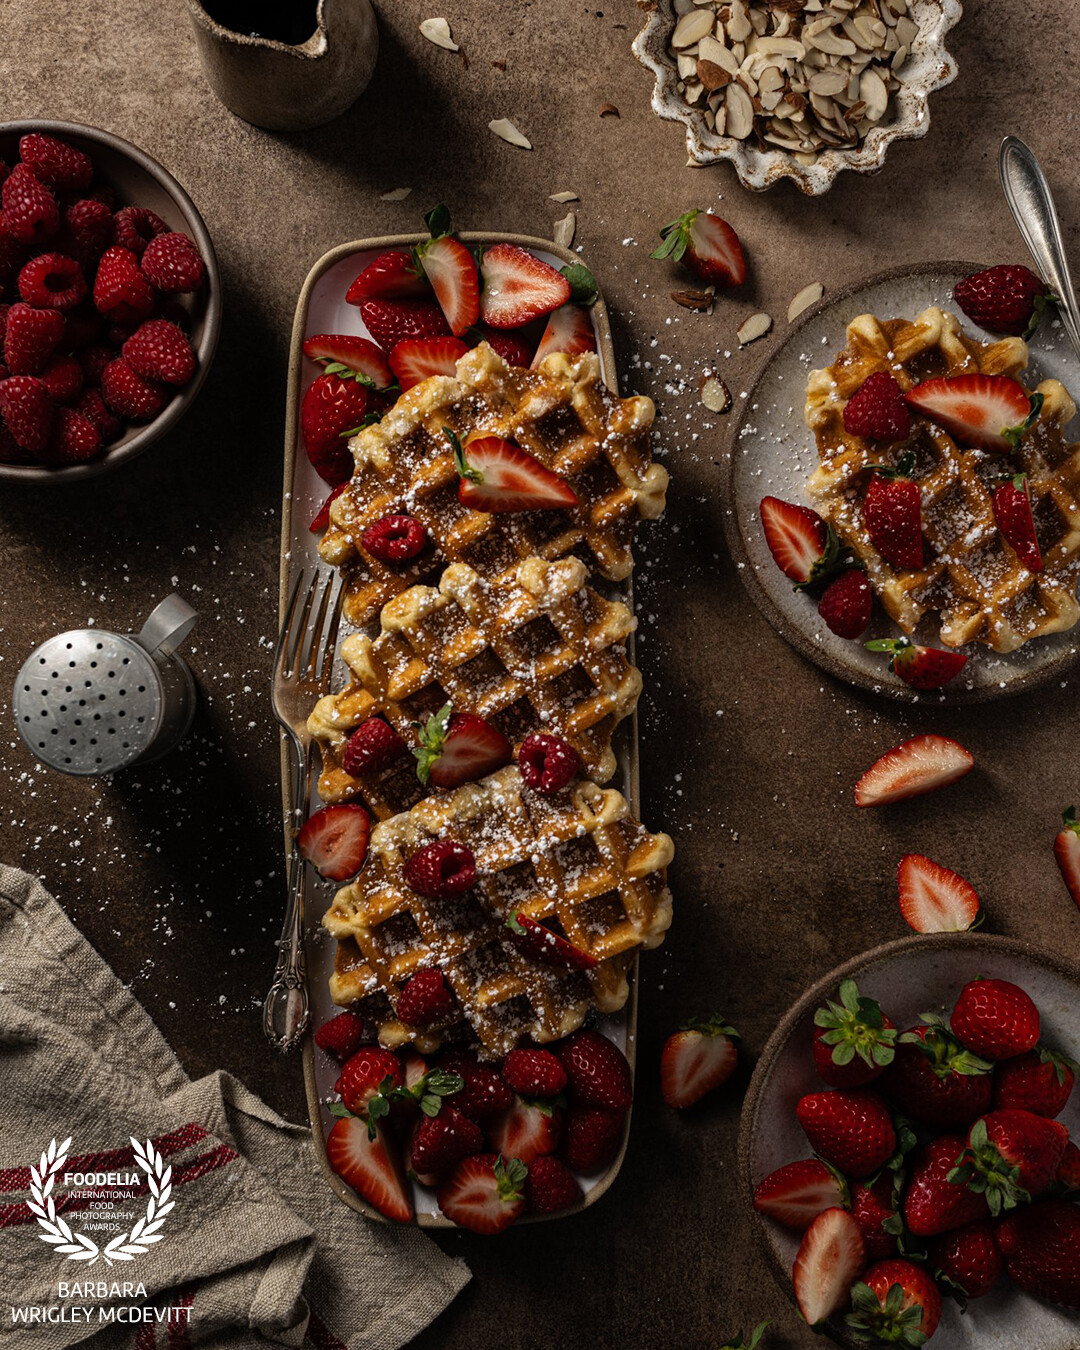 I wanted to do something a little festive for the holidays so I chose this Belgian Waffle, strawberry and raspberry composition on a brown background.  Shot with a Nikon z7ii, 24-120 lens at 40 mm, f/6.3, ss 125.  Profoto B10+ artificial light.  Edited in Lightroom.  After the shoot, all I had to do was serve and eat it!